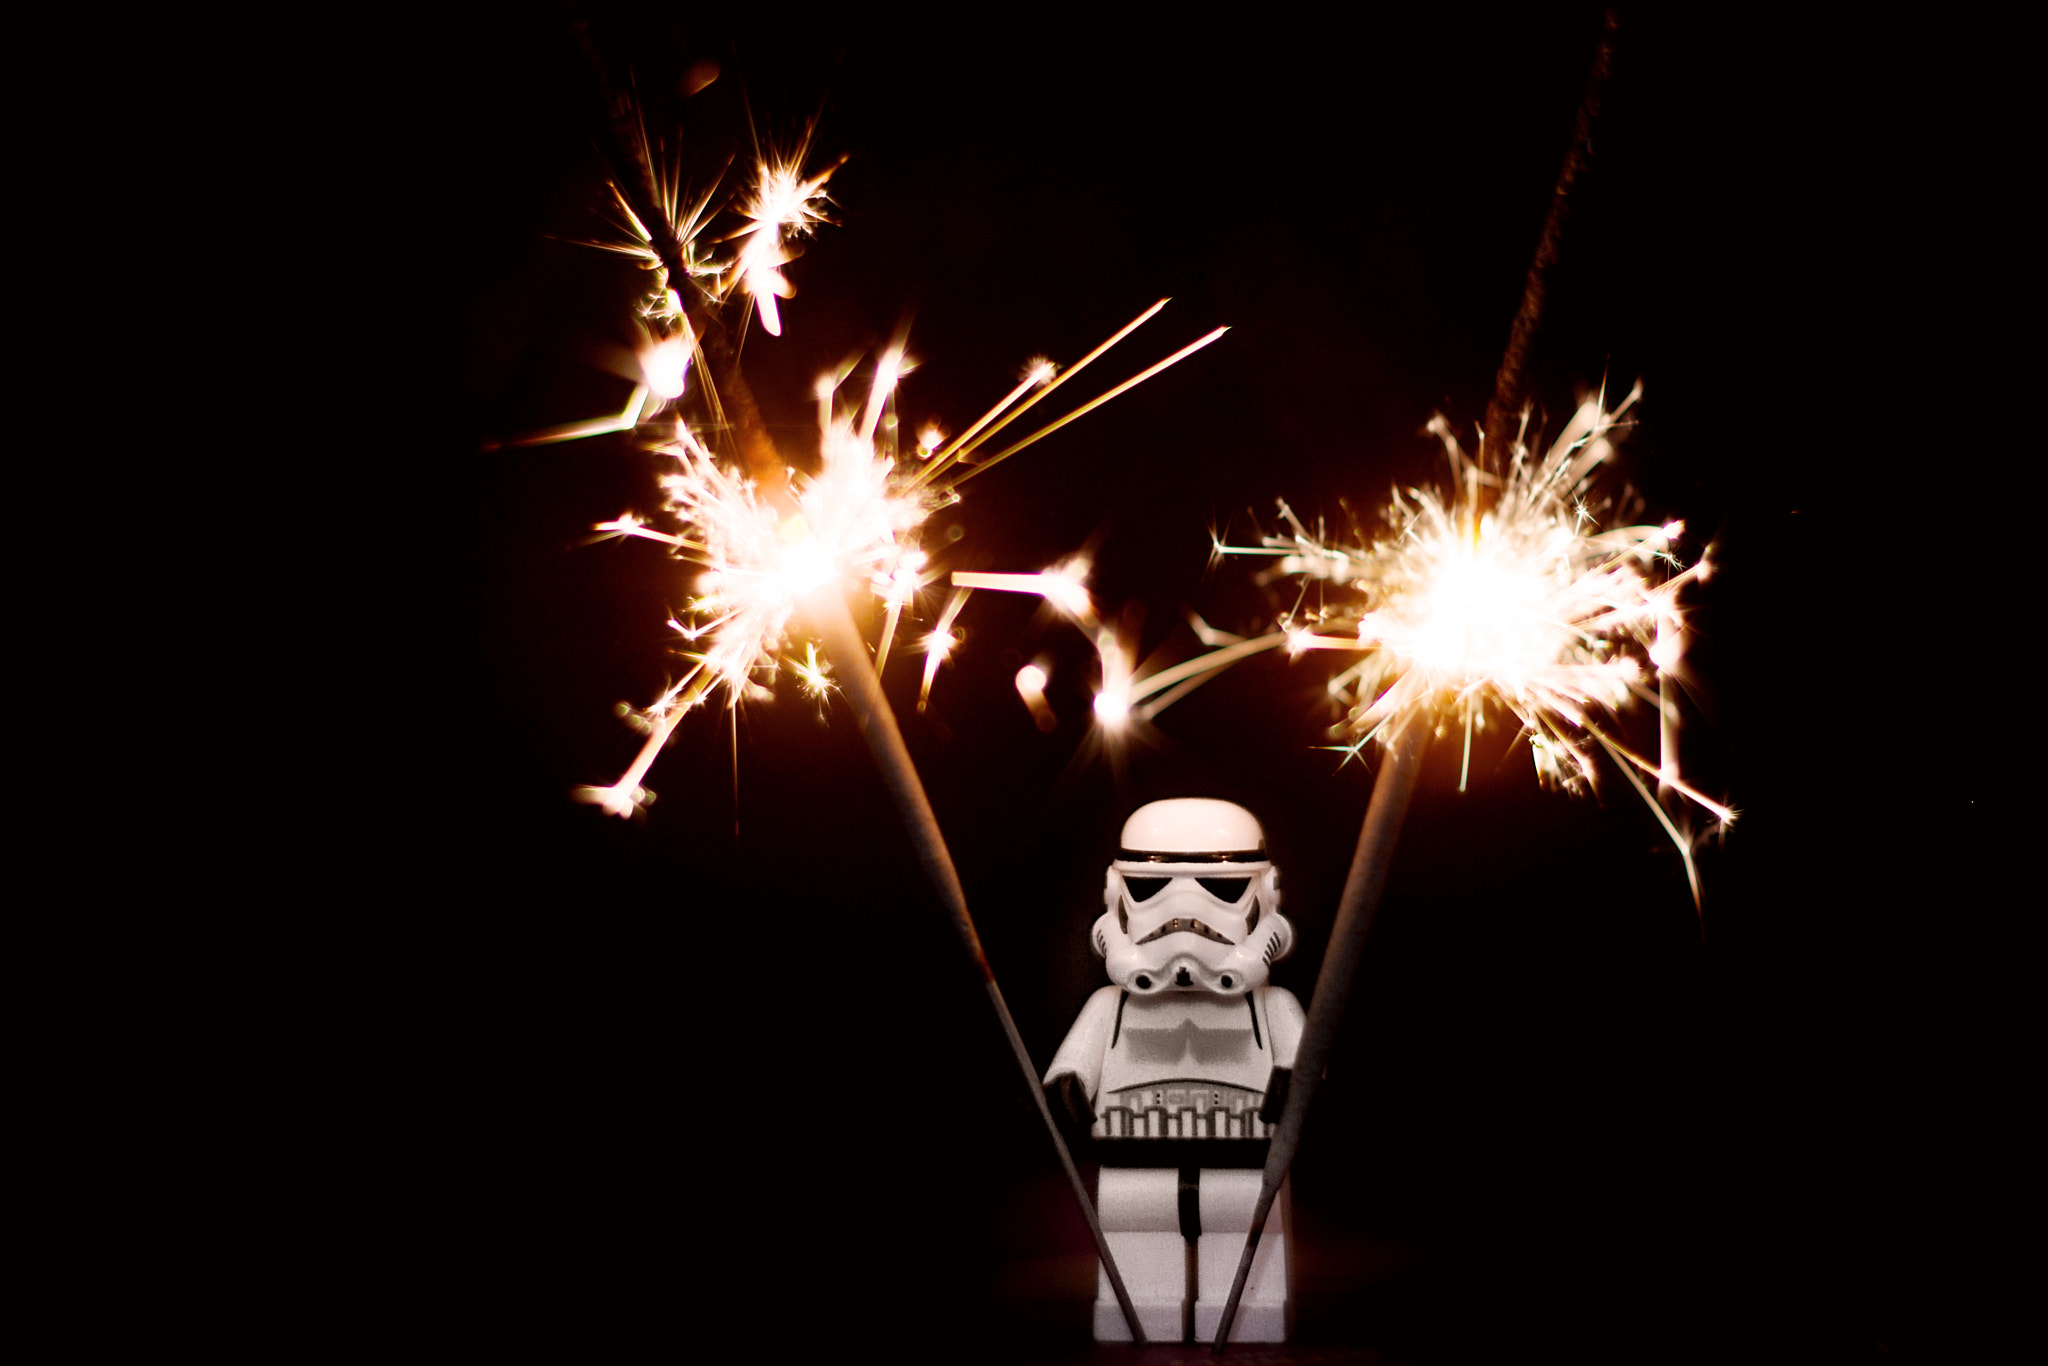 Nikon D800 sample photo. A stormtrooper and some sparklers photography